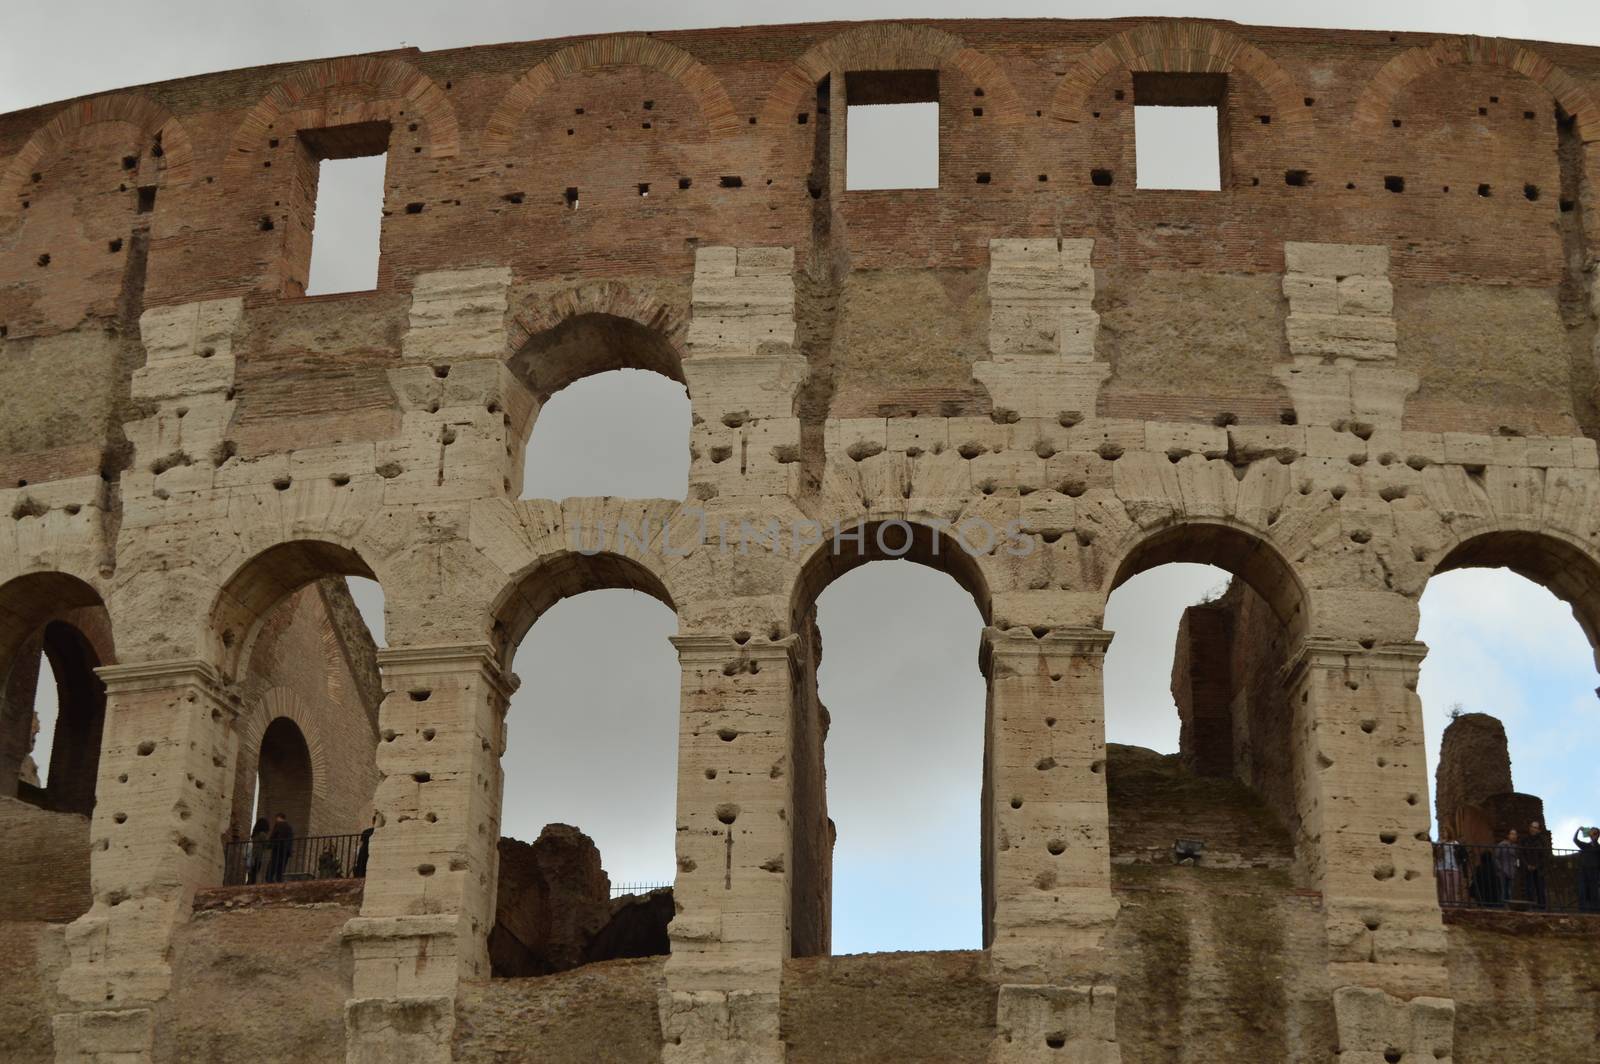 Roman Colosseum in autumn on a cloudy day in Rome, Italy 7 October 2018 by claire_lucia